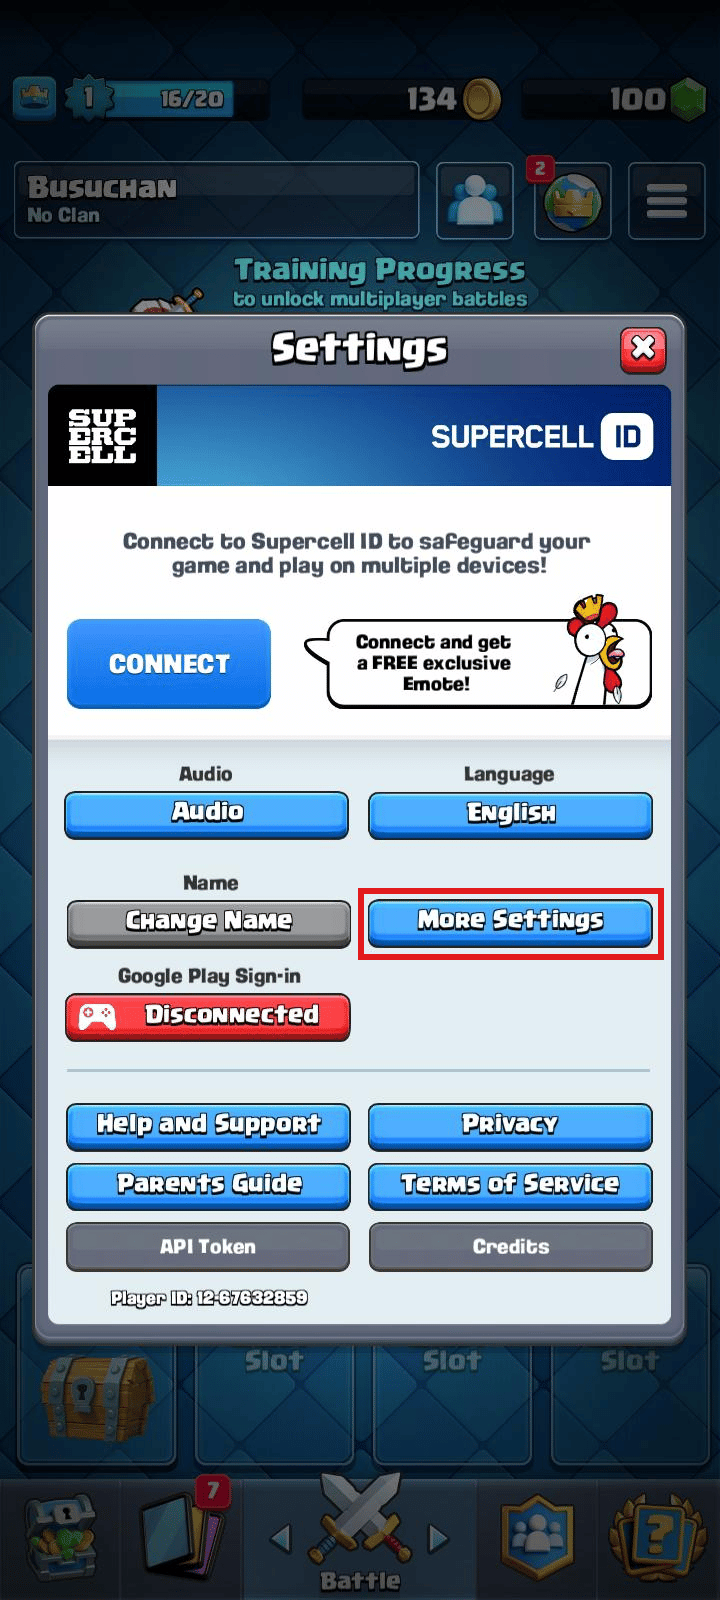 Tap on More Settings | How to delete clash royale account